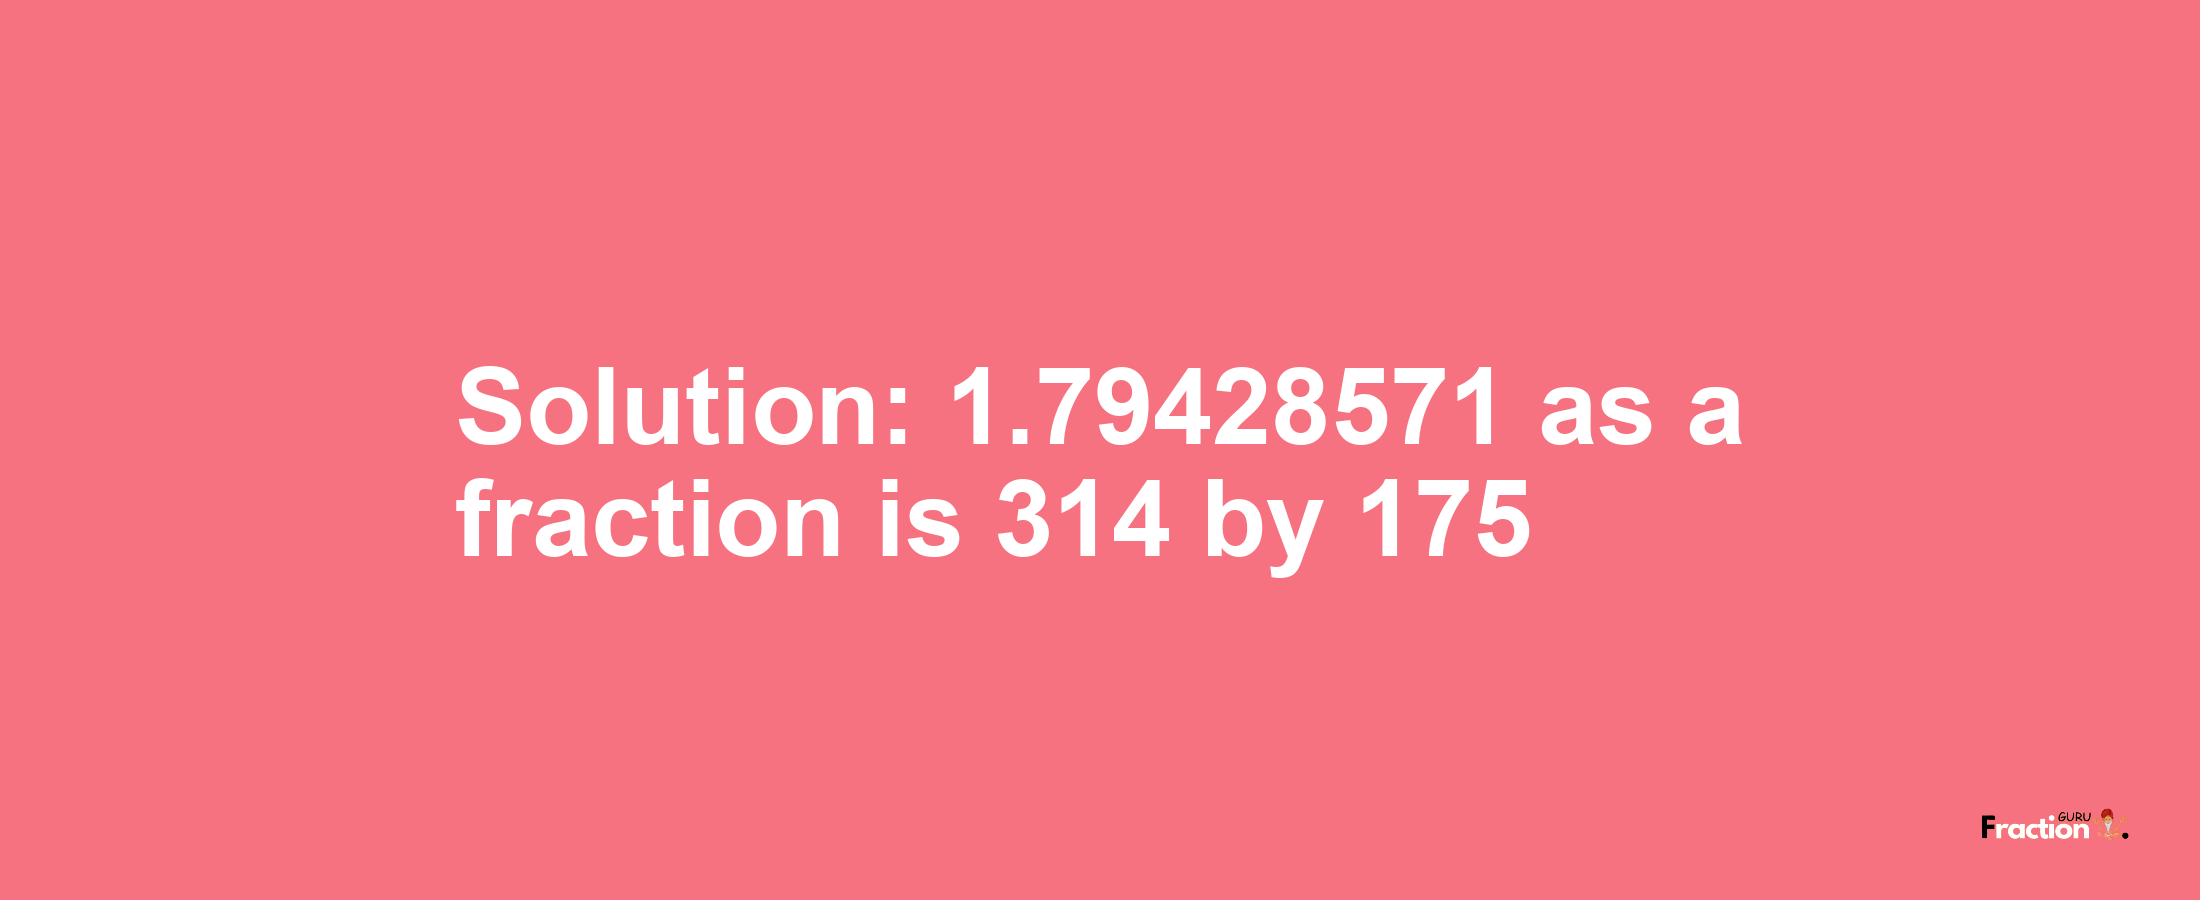 Solution:1.79428571 as a fraction is 314/175